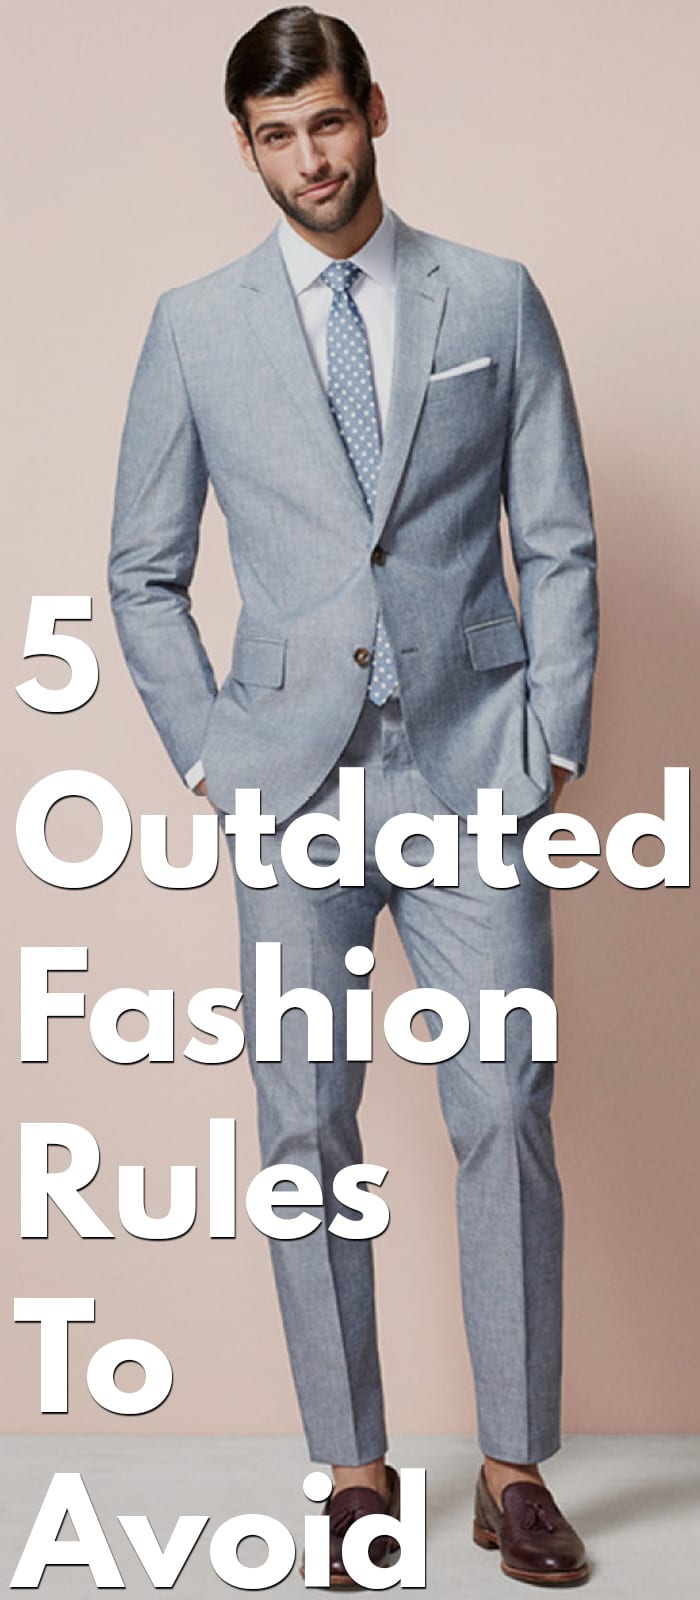 5 Outdated Fashion Rules